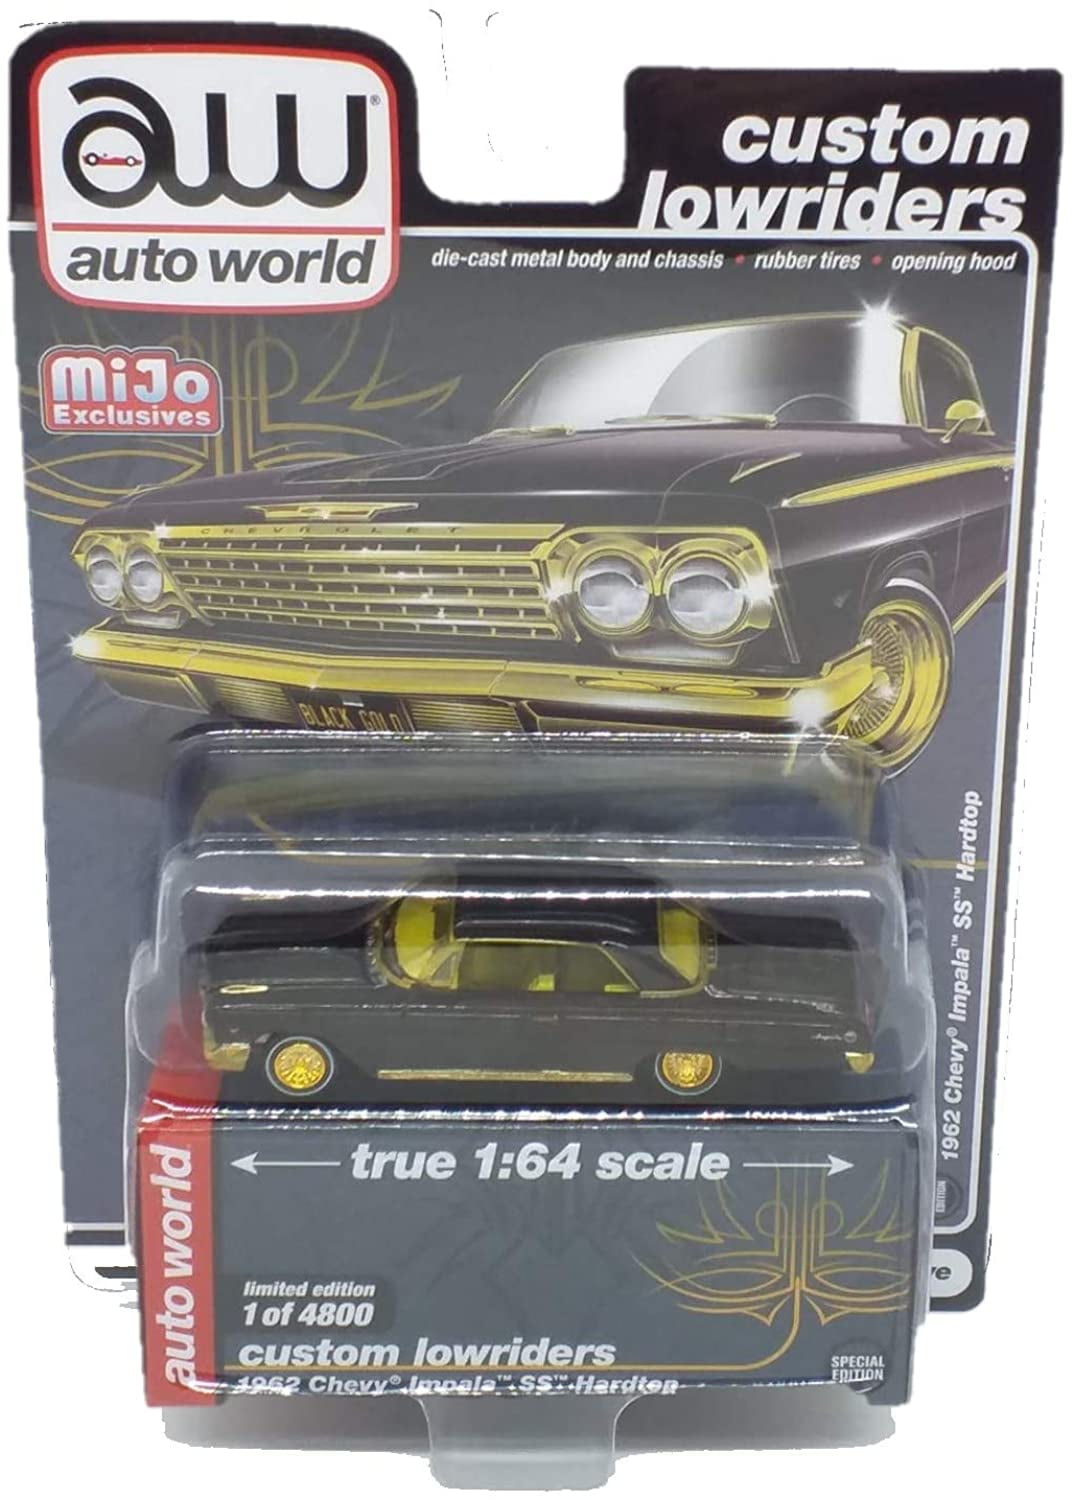 Autoworld 1/64 diecast Model of 1962 Chevy Impala SS Hardtop Black and Gold Custom Lowriders Limited Edition to 4800 Pieces Worldwide CP7656 